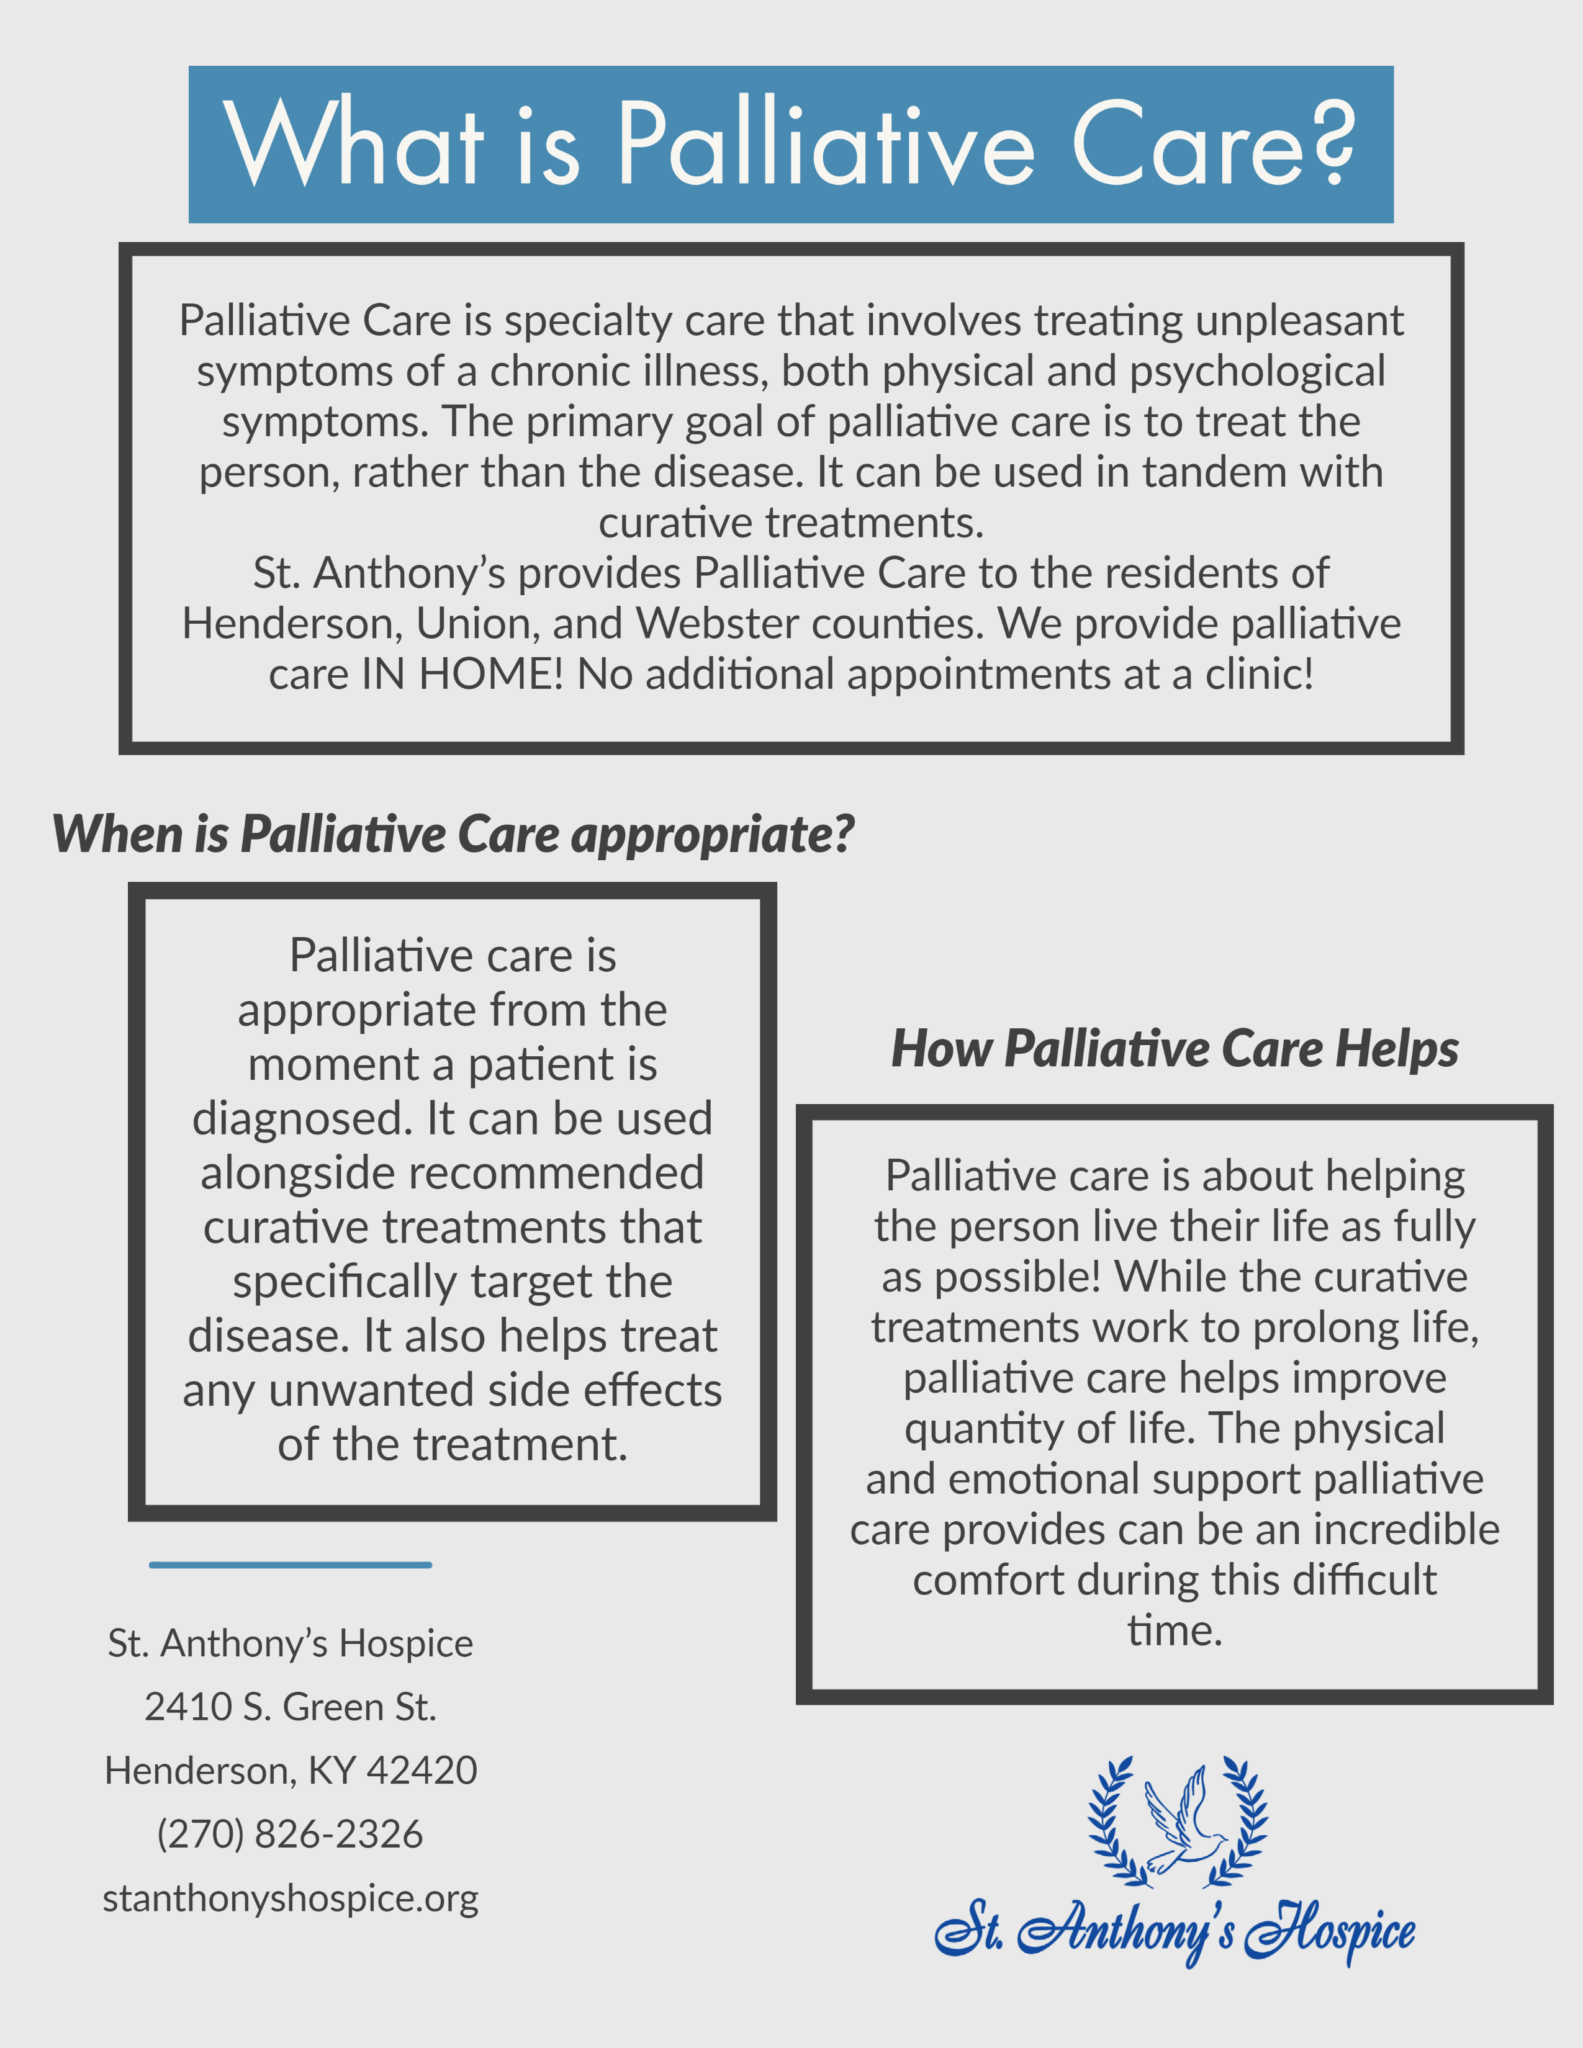 What is Palliative Care? St. Anthony's Hospice